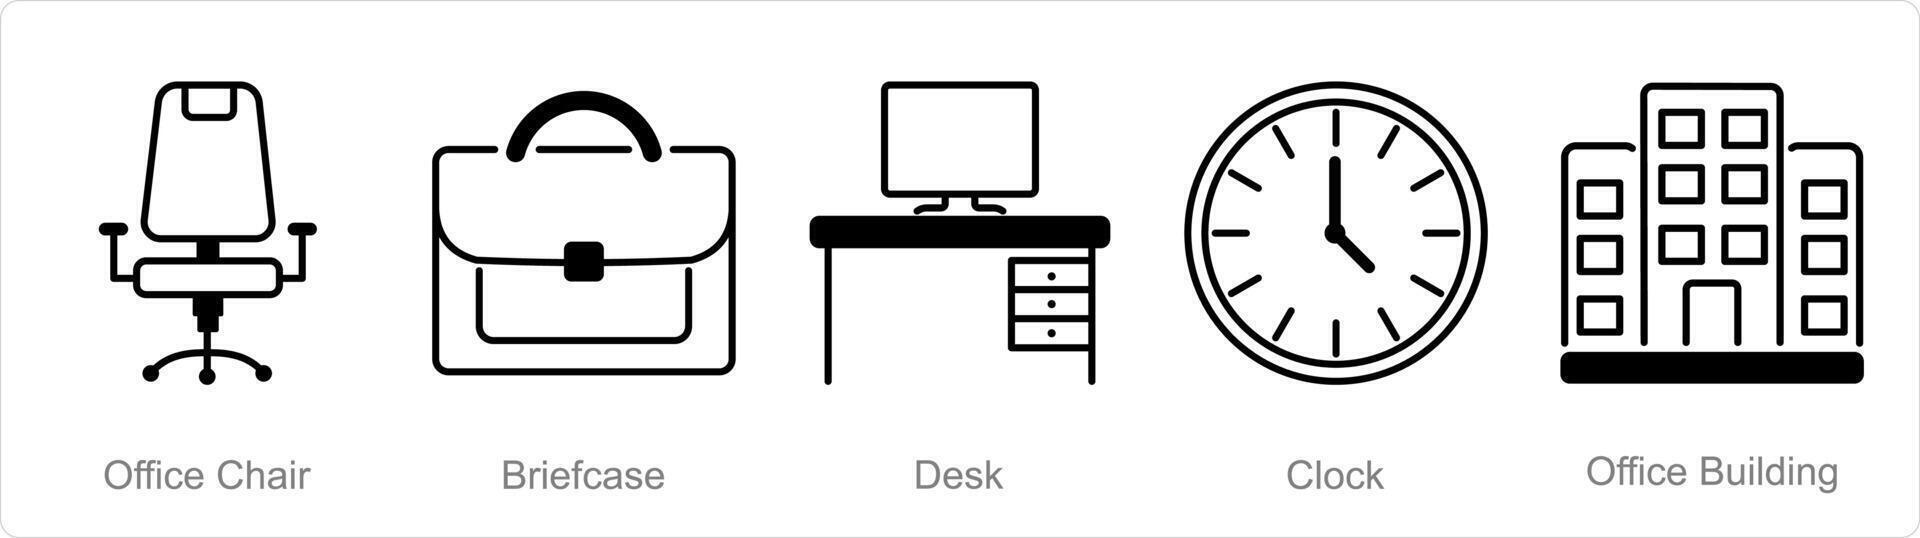 A set of 5 Office icons as office chair, briefcase, desk vector